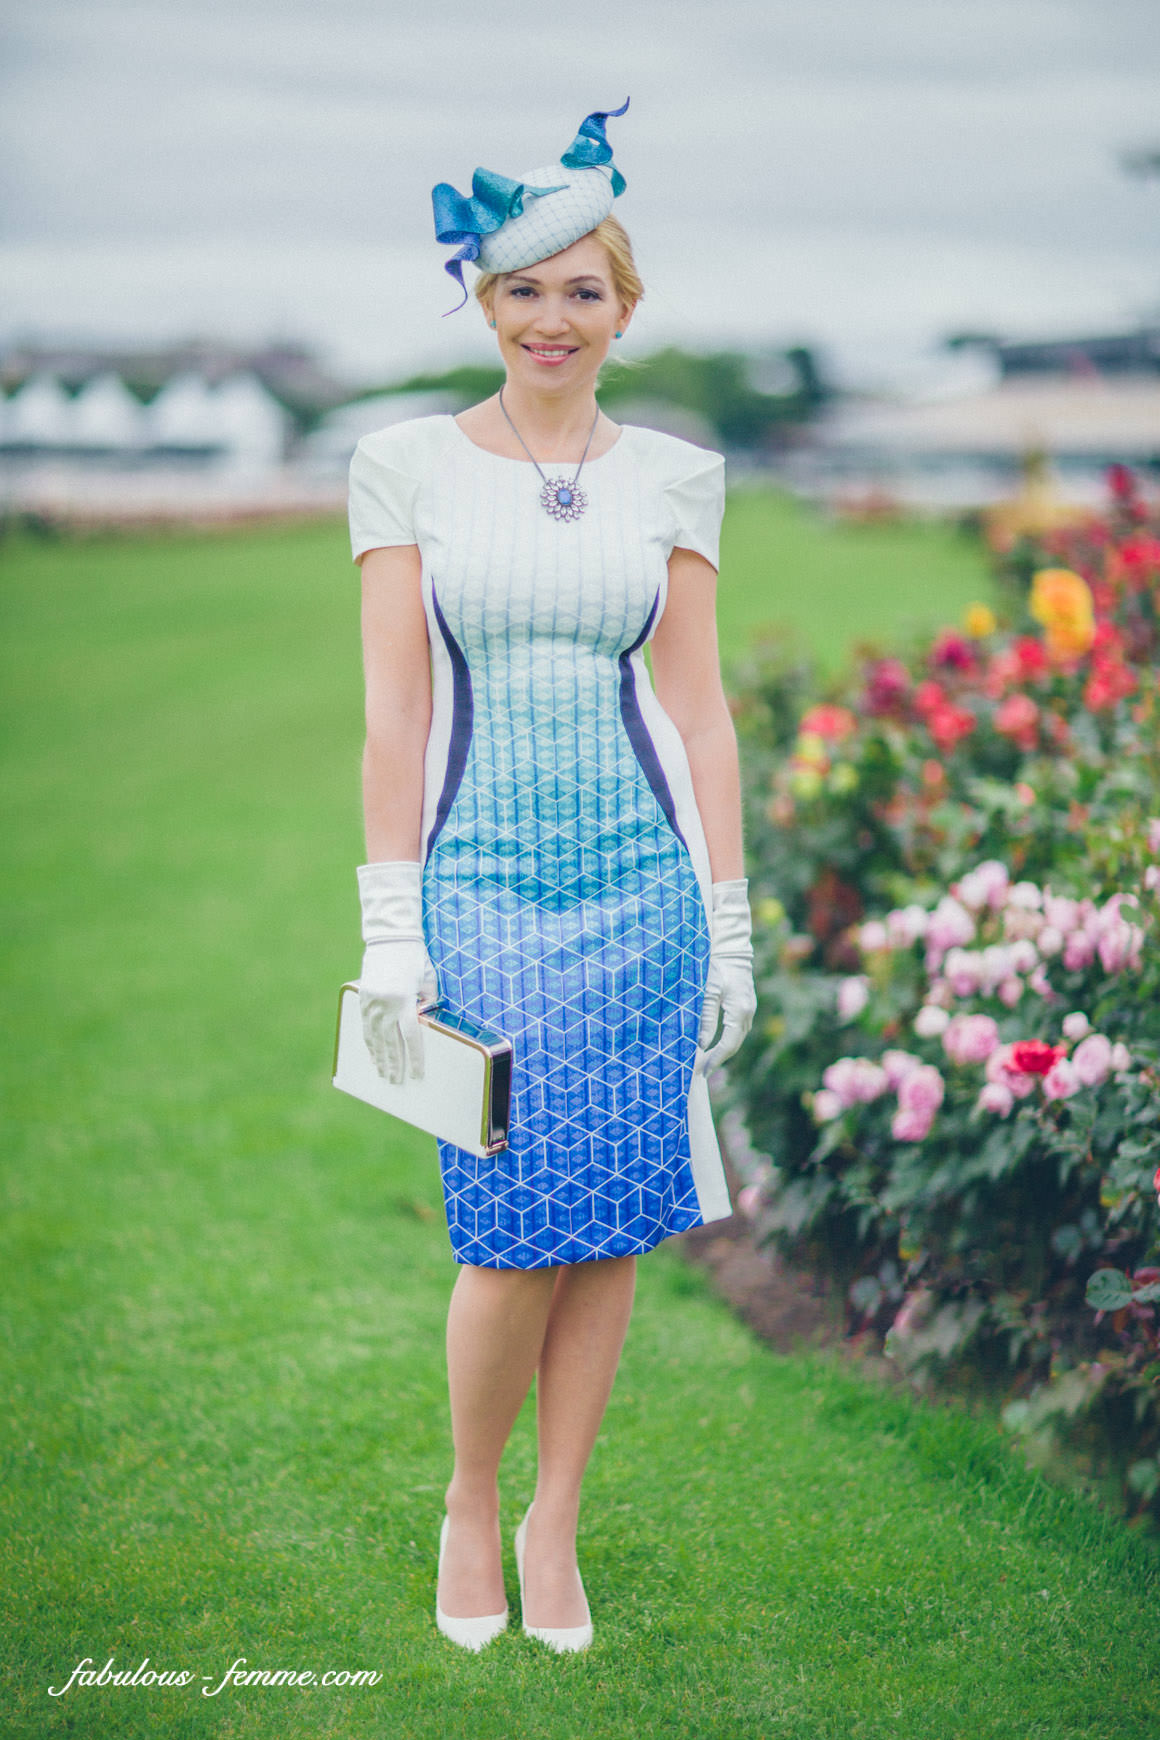 spring racing - what to wear in 2013